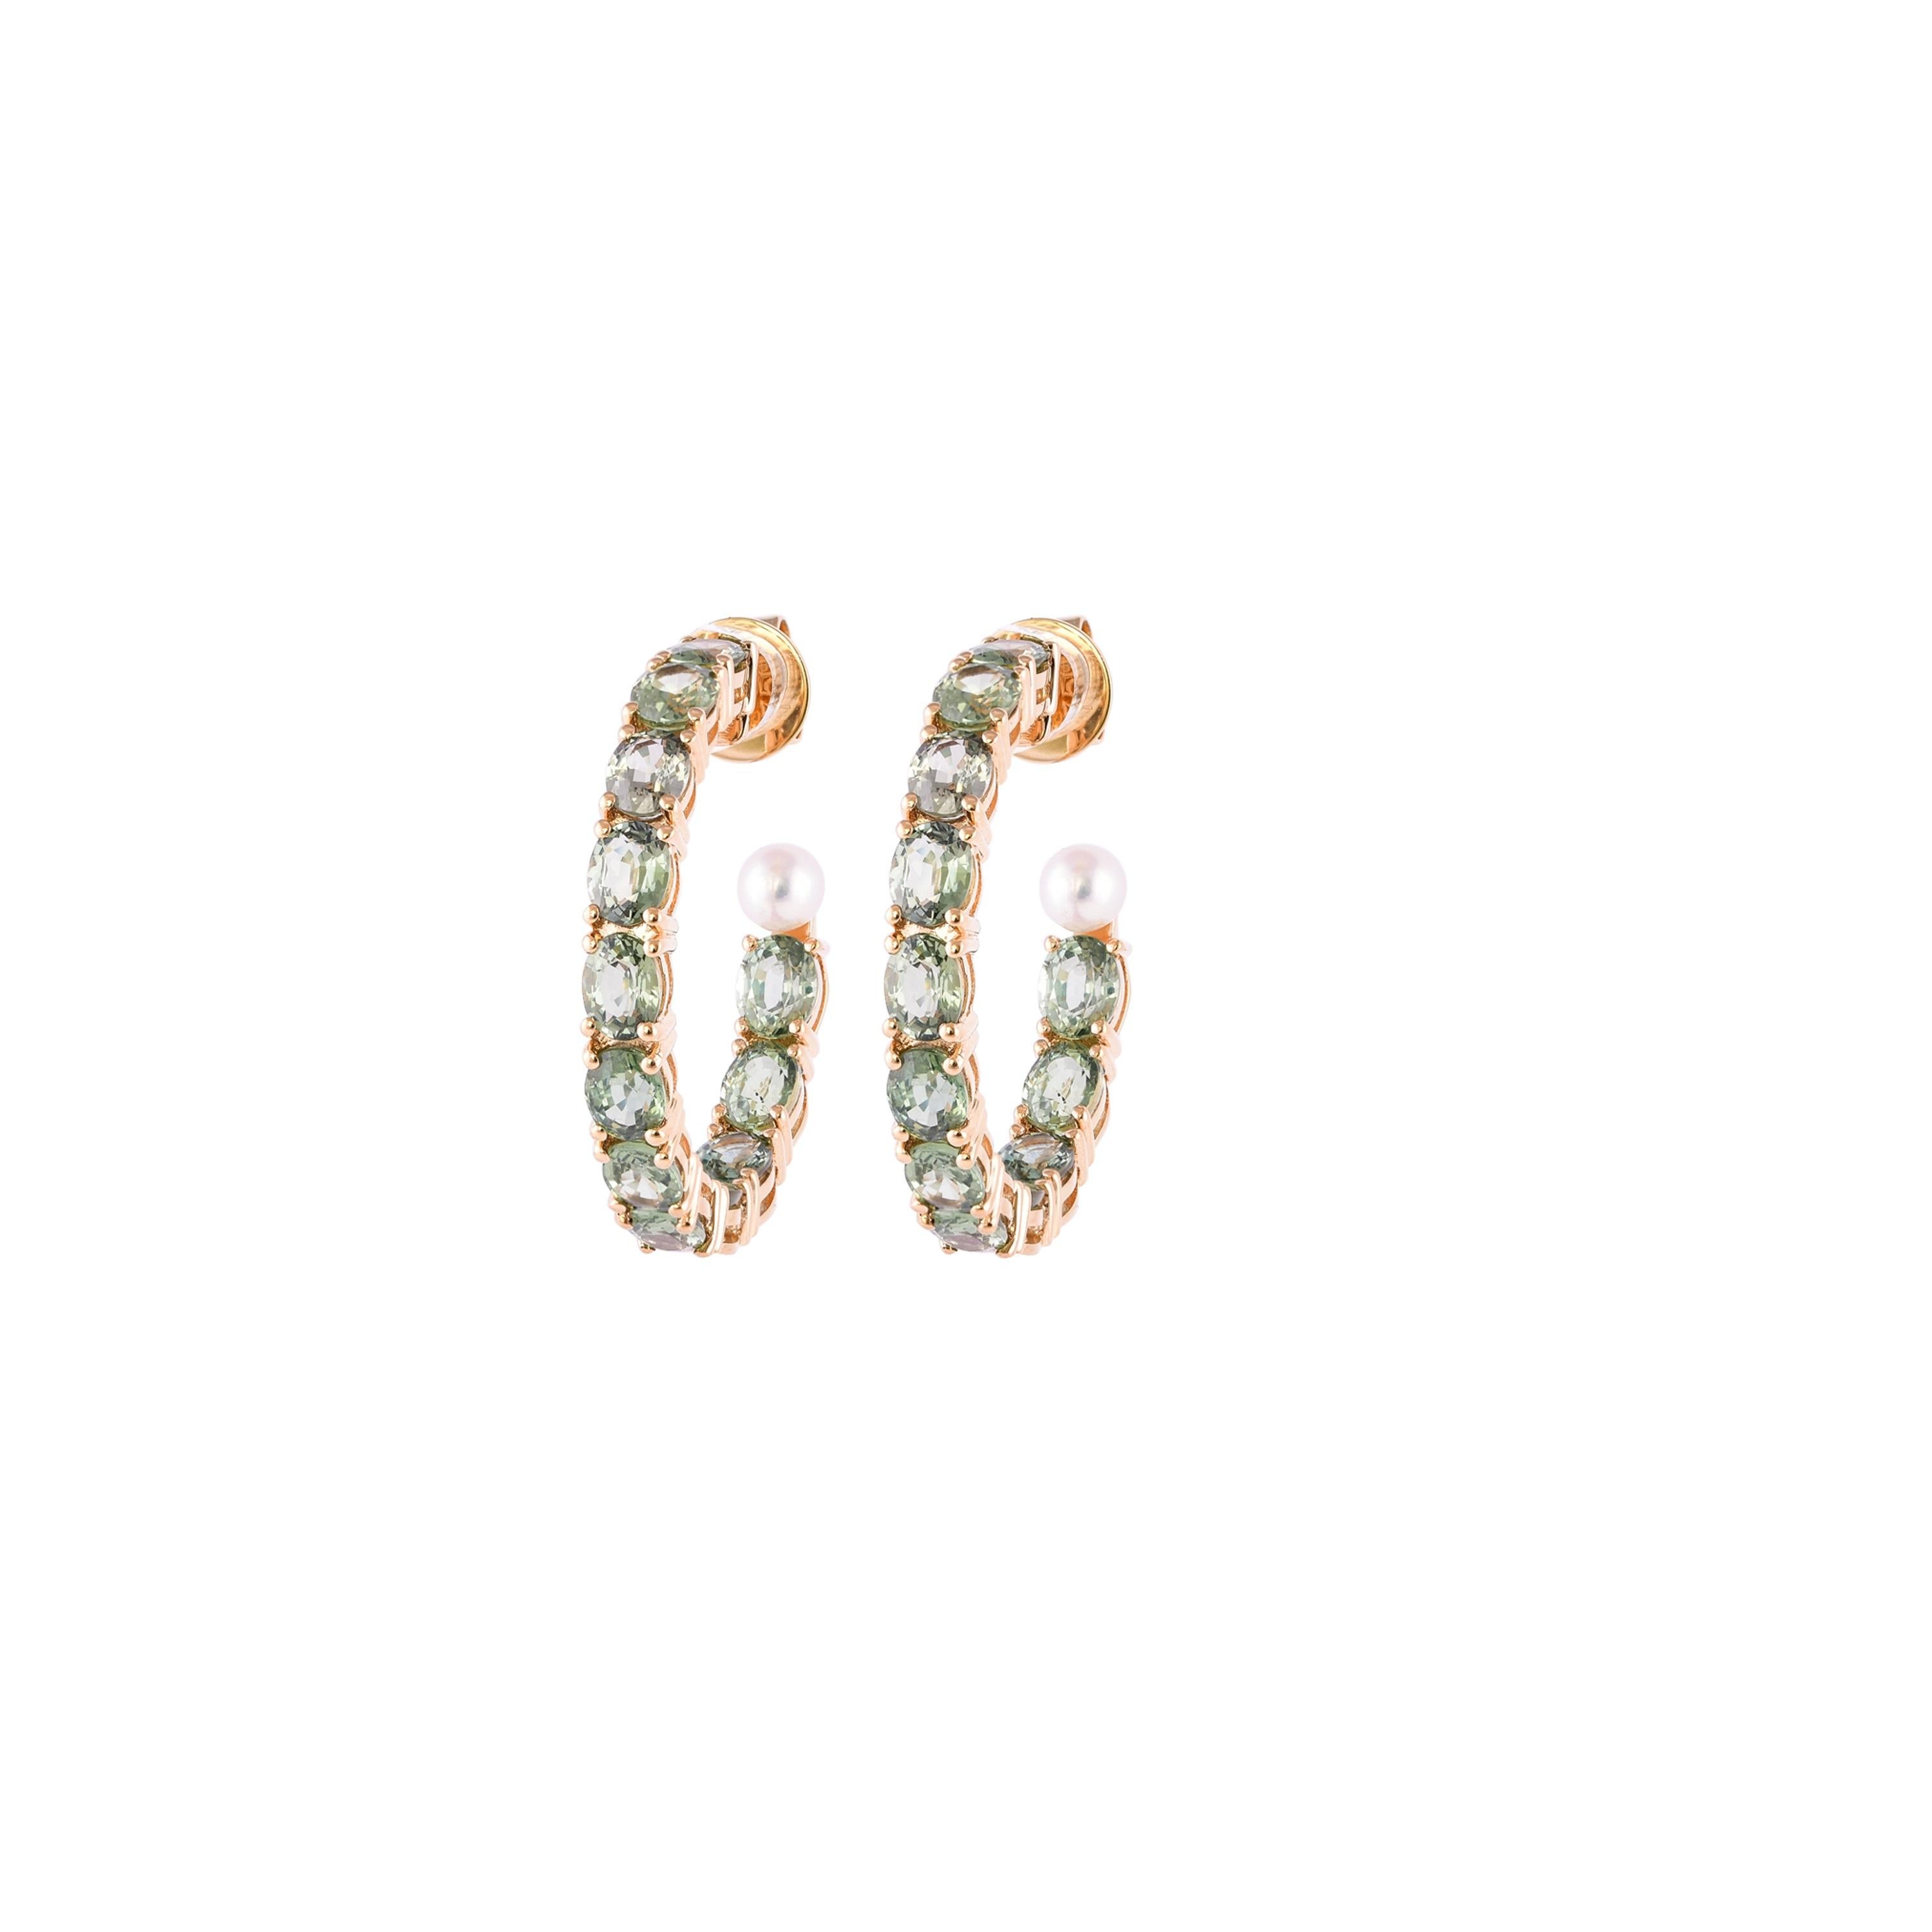 Sunita Nahata presents a collection of simple, classic and dainty sapphire earrings. These earrings in particular feature sparkling green sapphire hoops with elegant pearls to accent the gemstones. These are light and comfortable and are suitable